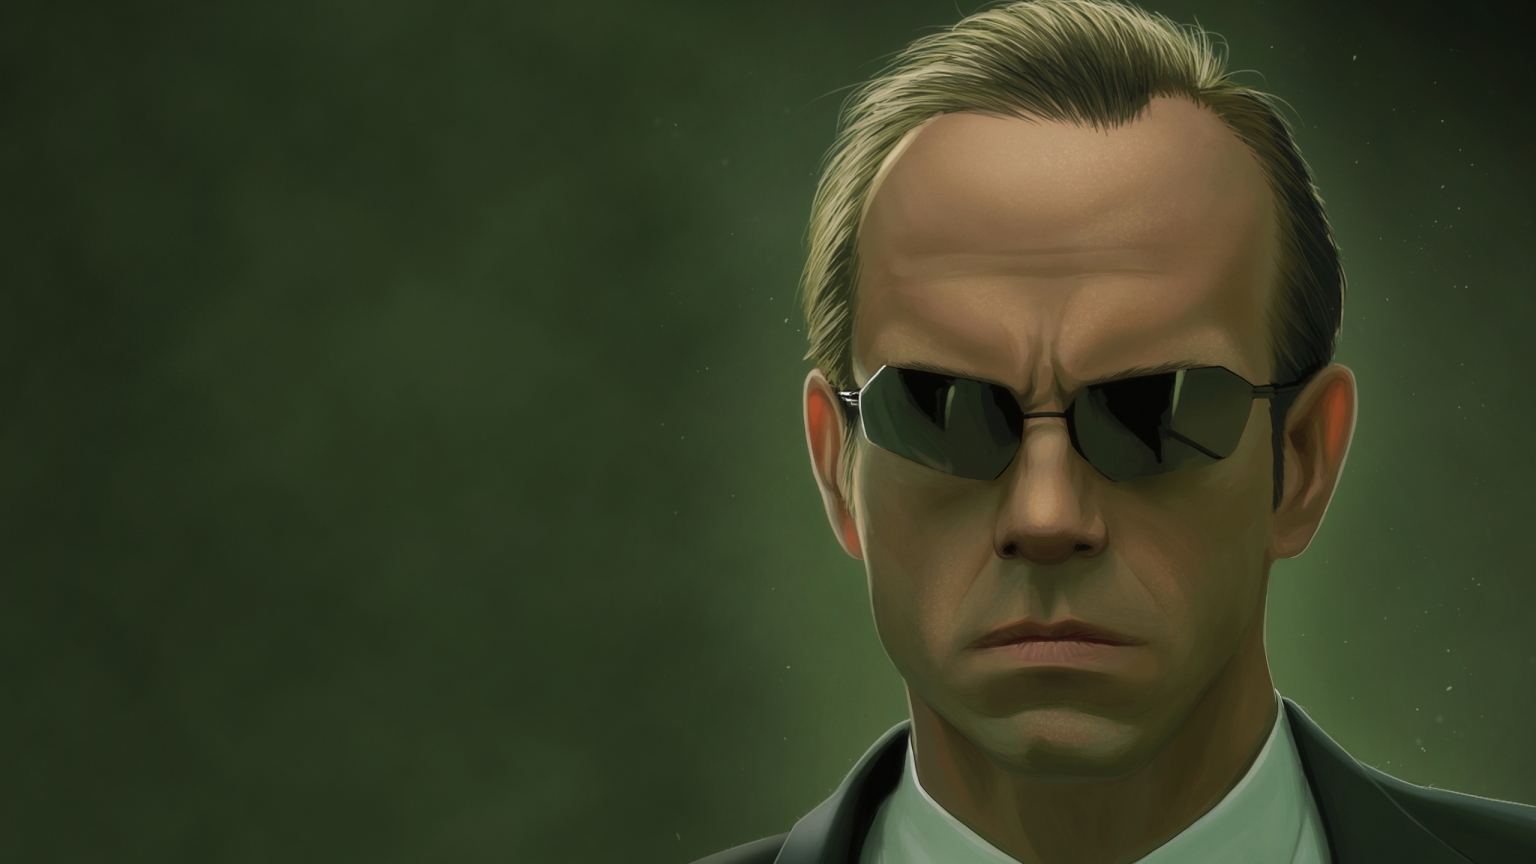 The Matrix Agent Smith for 1536 x 864 HDTV resolution